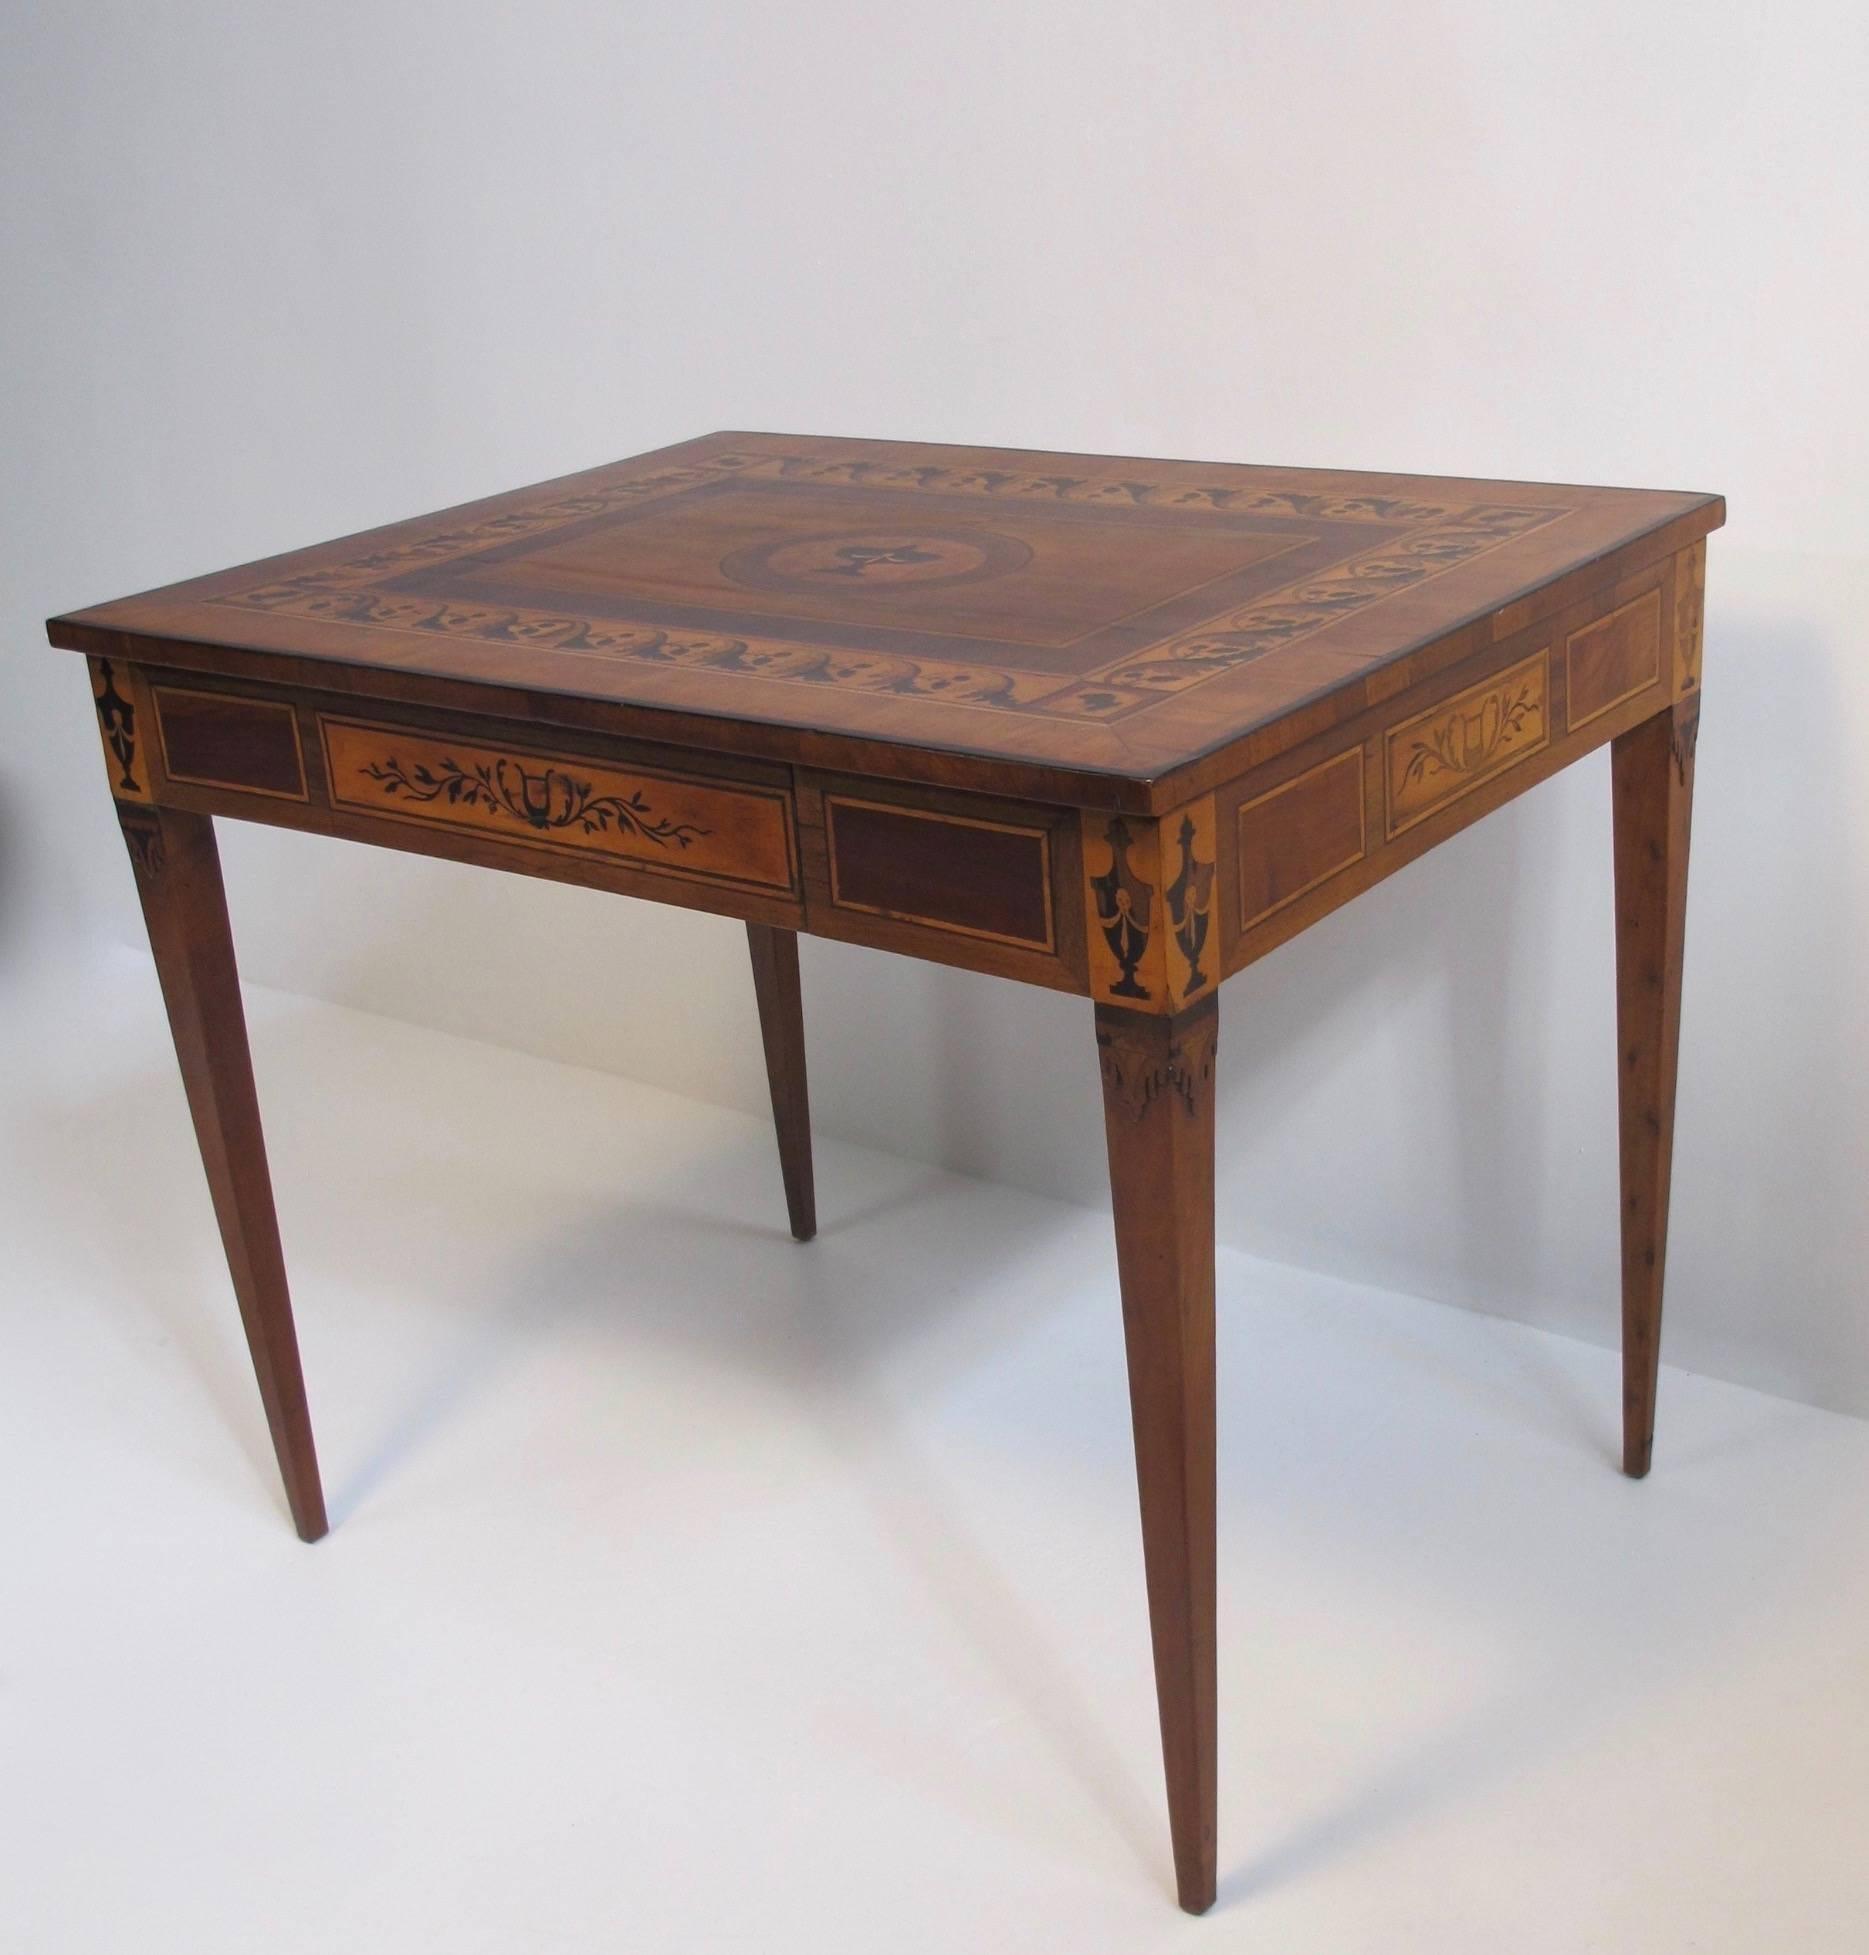  Italian Parquetry Inlaid Writing Table Desk, 18th Century In Good Condition For Sale In San Francisco, CA